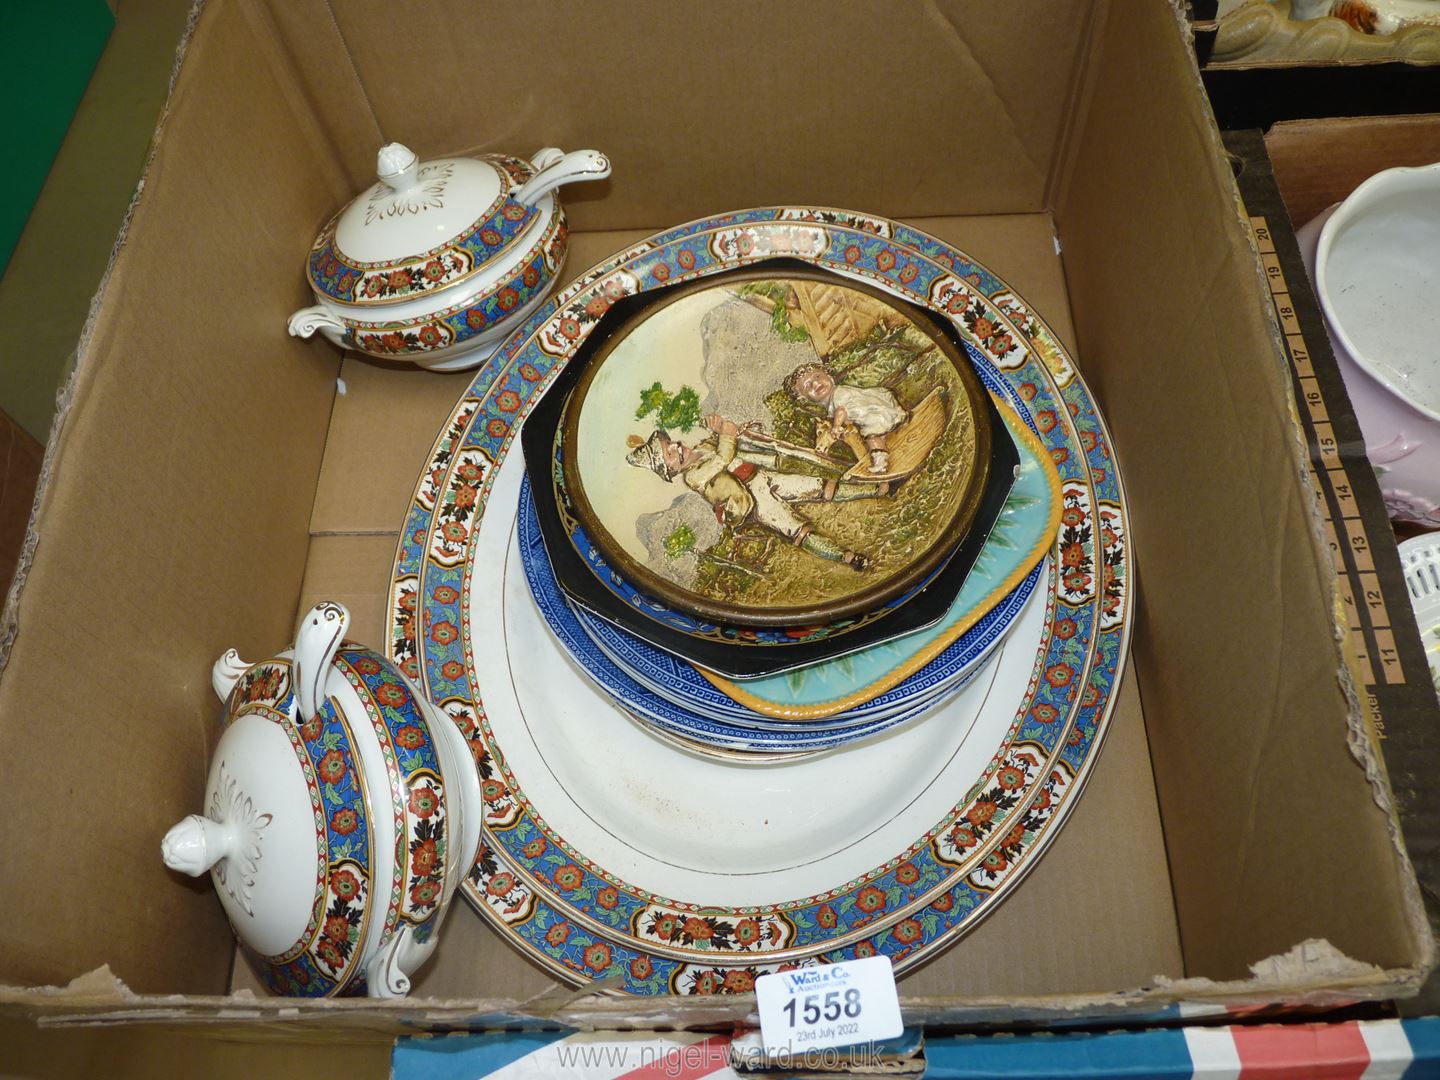 Three Regal ware serving meat plates and two serving dishes with lids and ladles and willow pattern